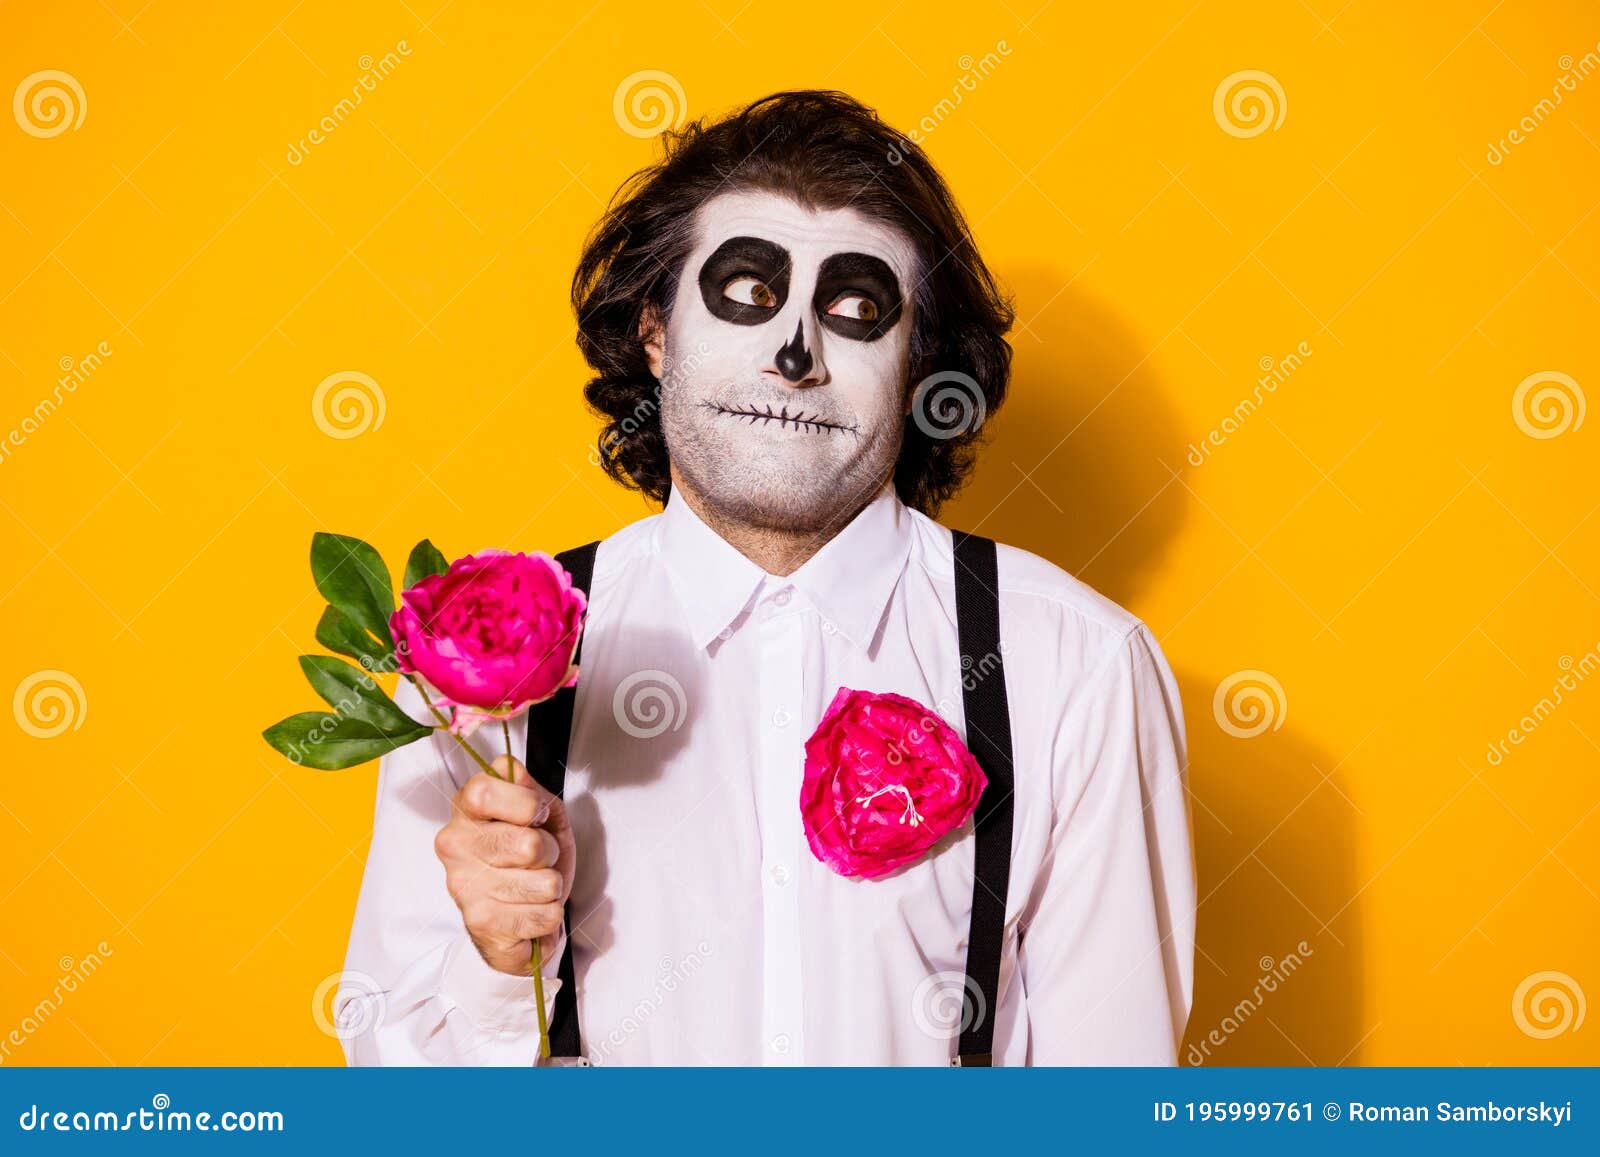 close-up portrait of handsome creepy baleful shy cheery guy holding in hand single natural fresh rose blooming blossom